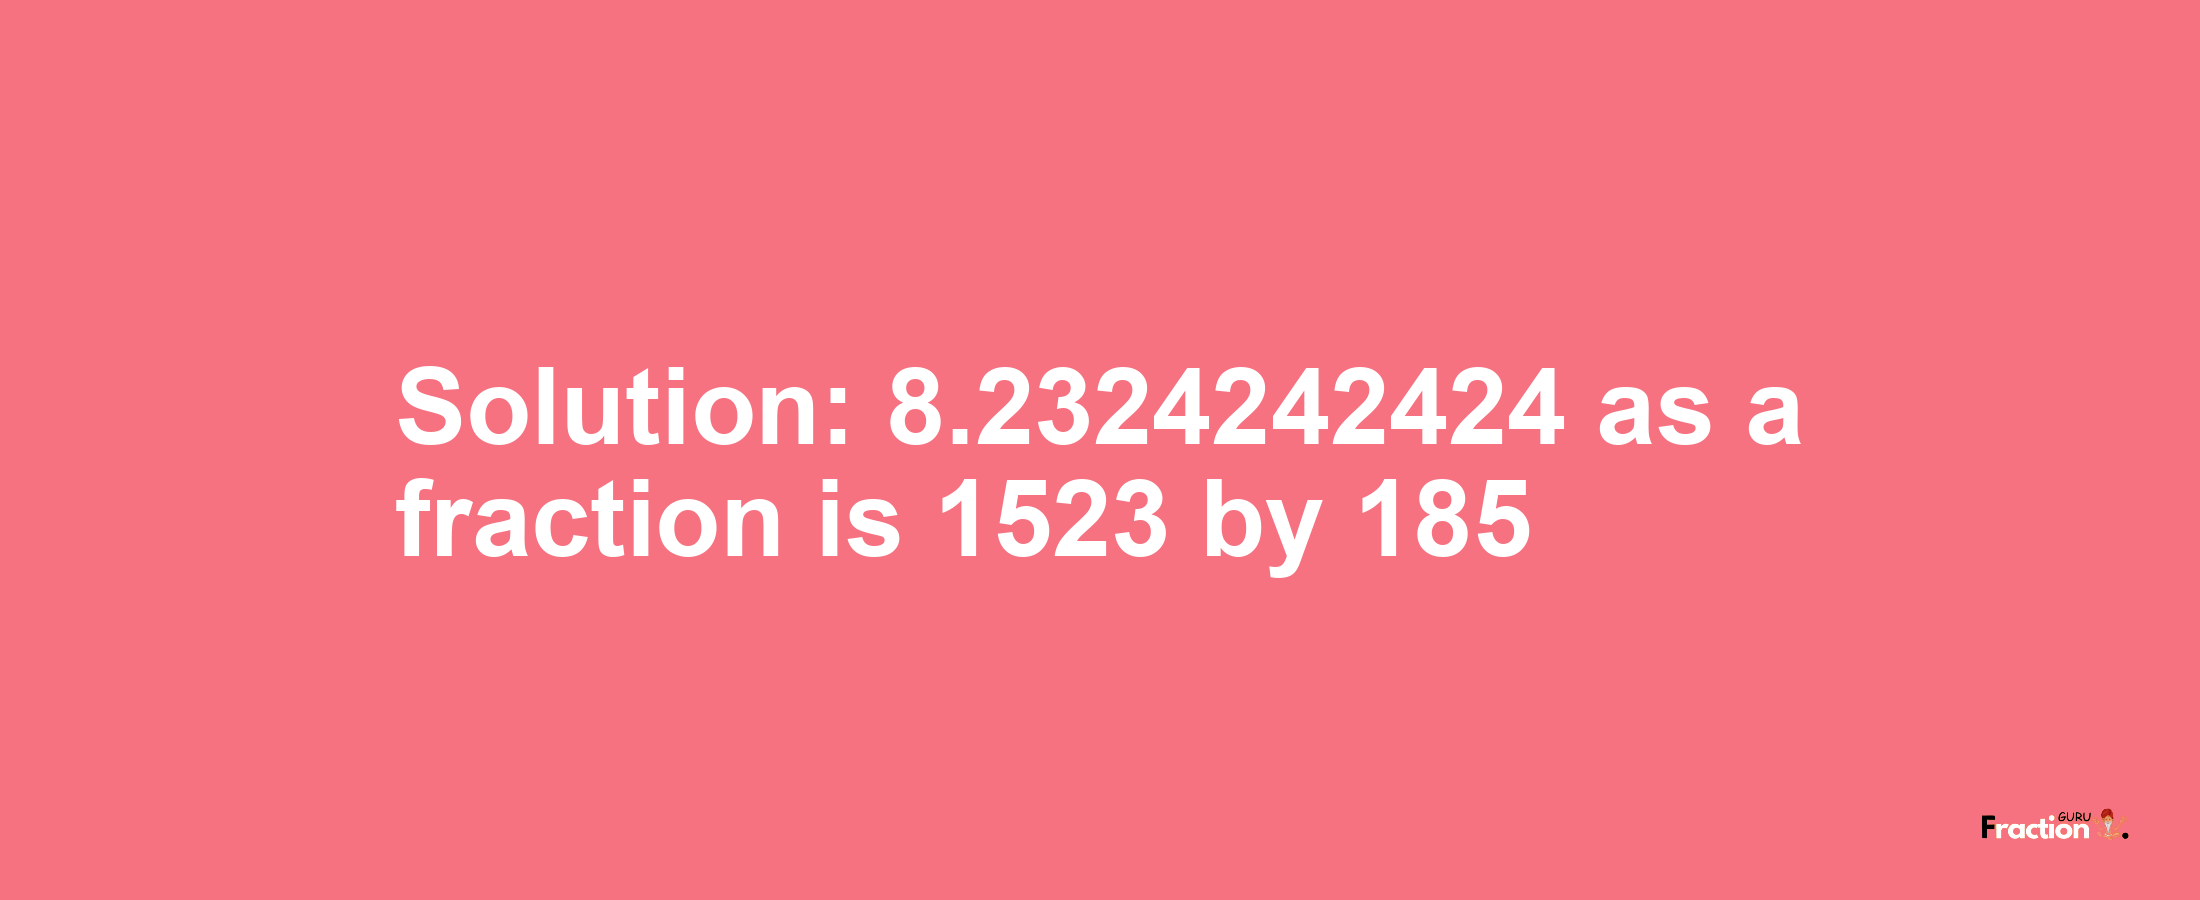 Solution:8.2324242424 as a fraction is 1523/185